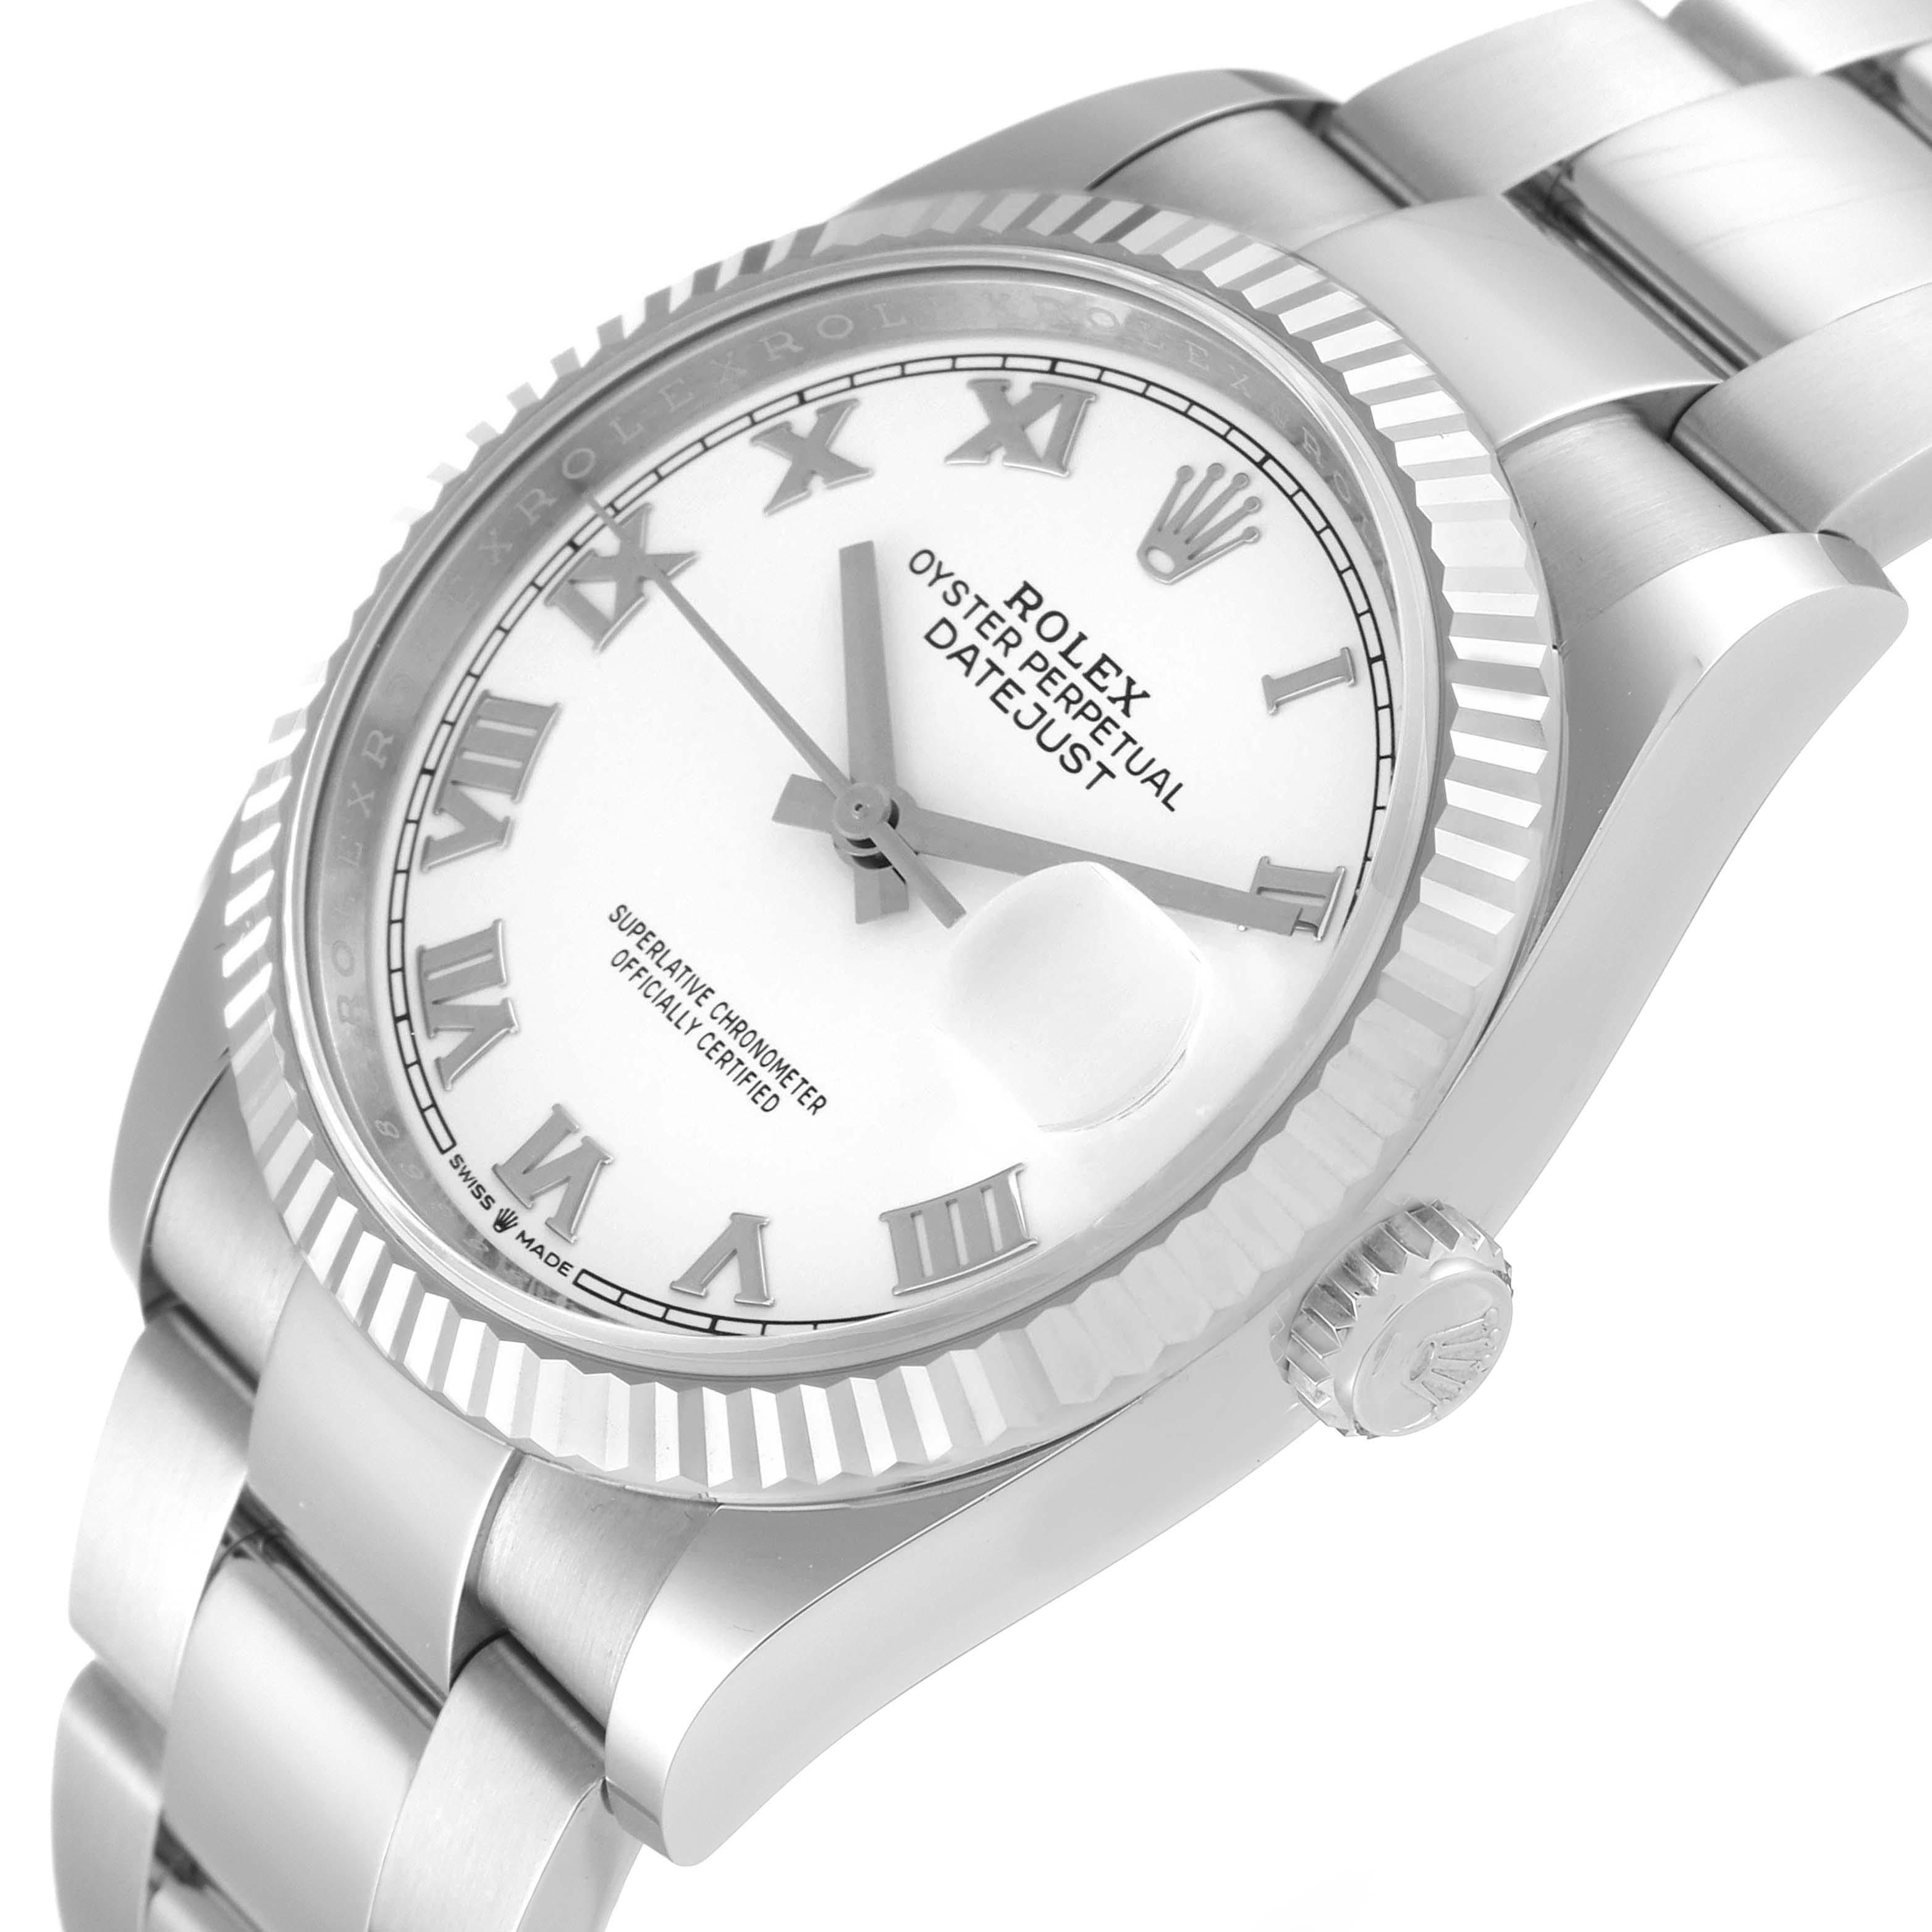 Rolex Datejust Steel White Gold Silver Dial Mens Watch 126234 Box Card ...